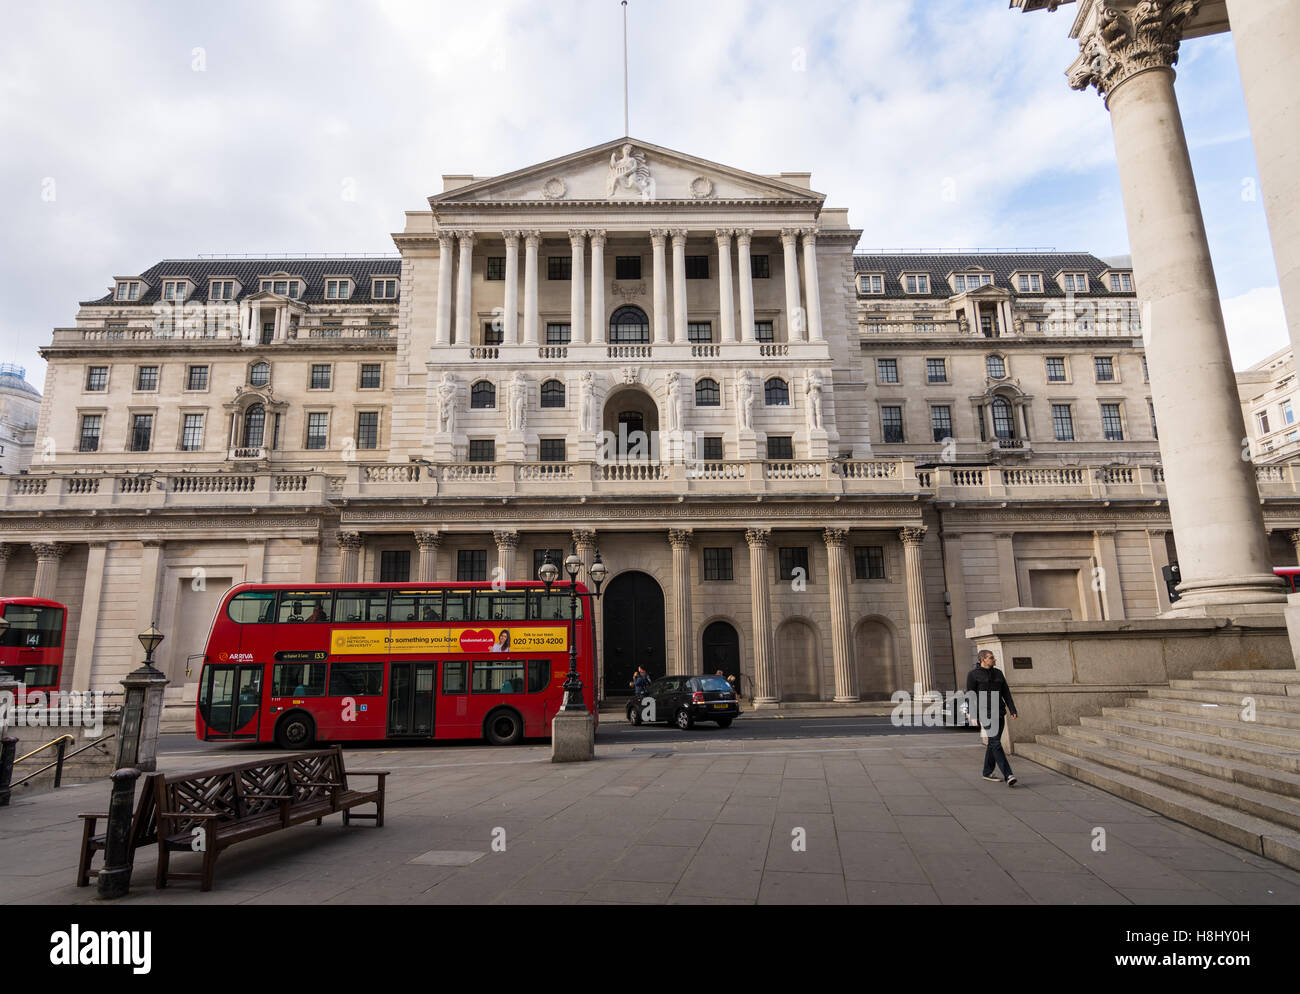 Front view of the Bank of England, Uk's Central Bank with iconic red double-decker London bus in the foreground. Stock Photo